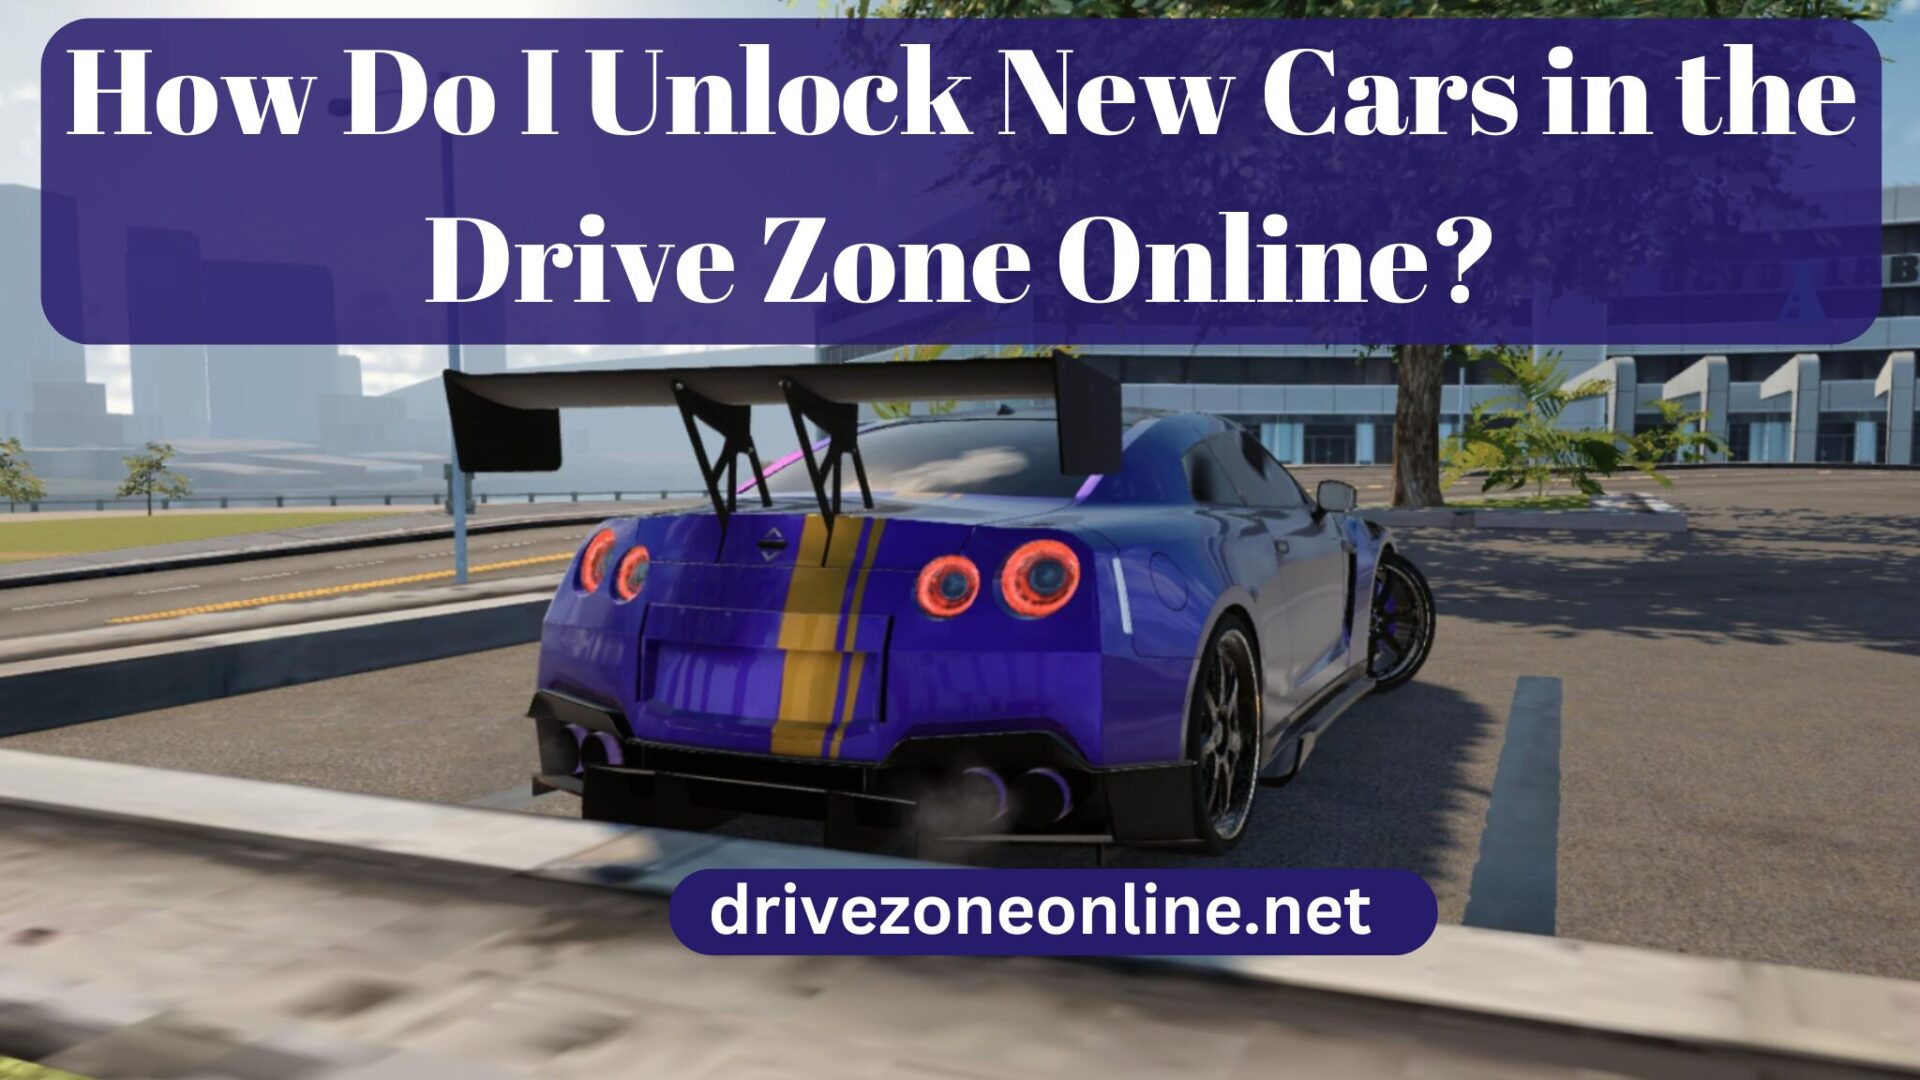 How Do I Unlock New Cars in the Drive Zone Online?